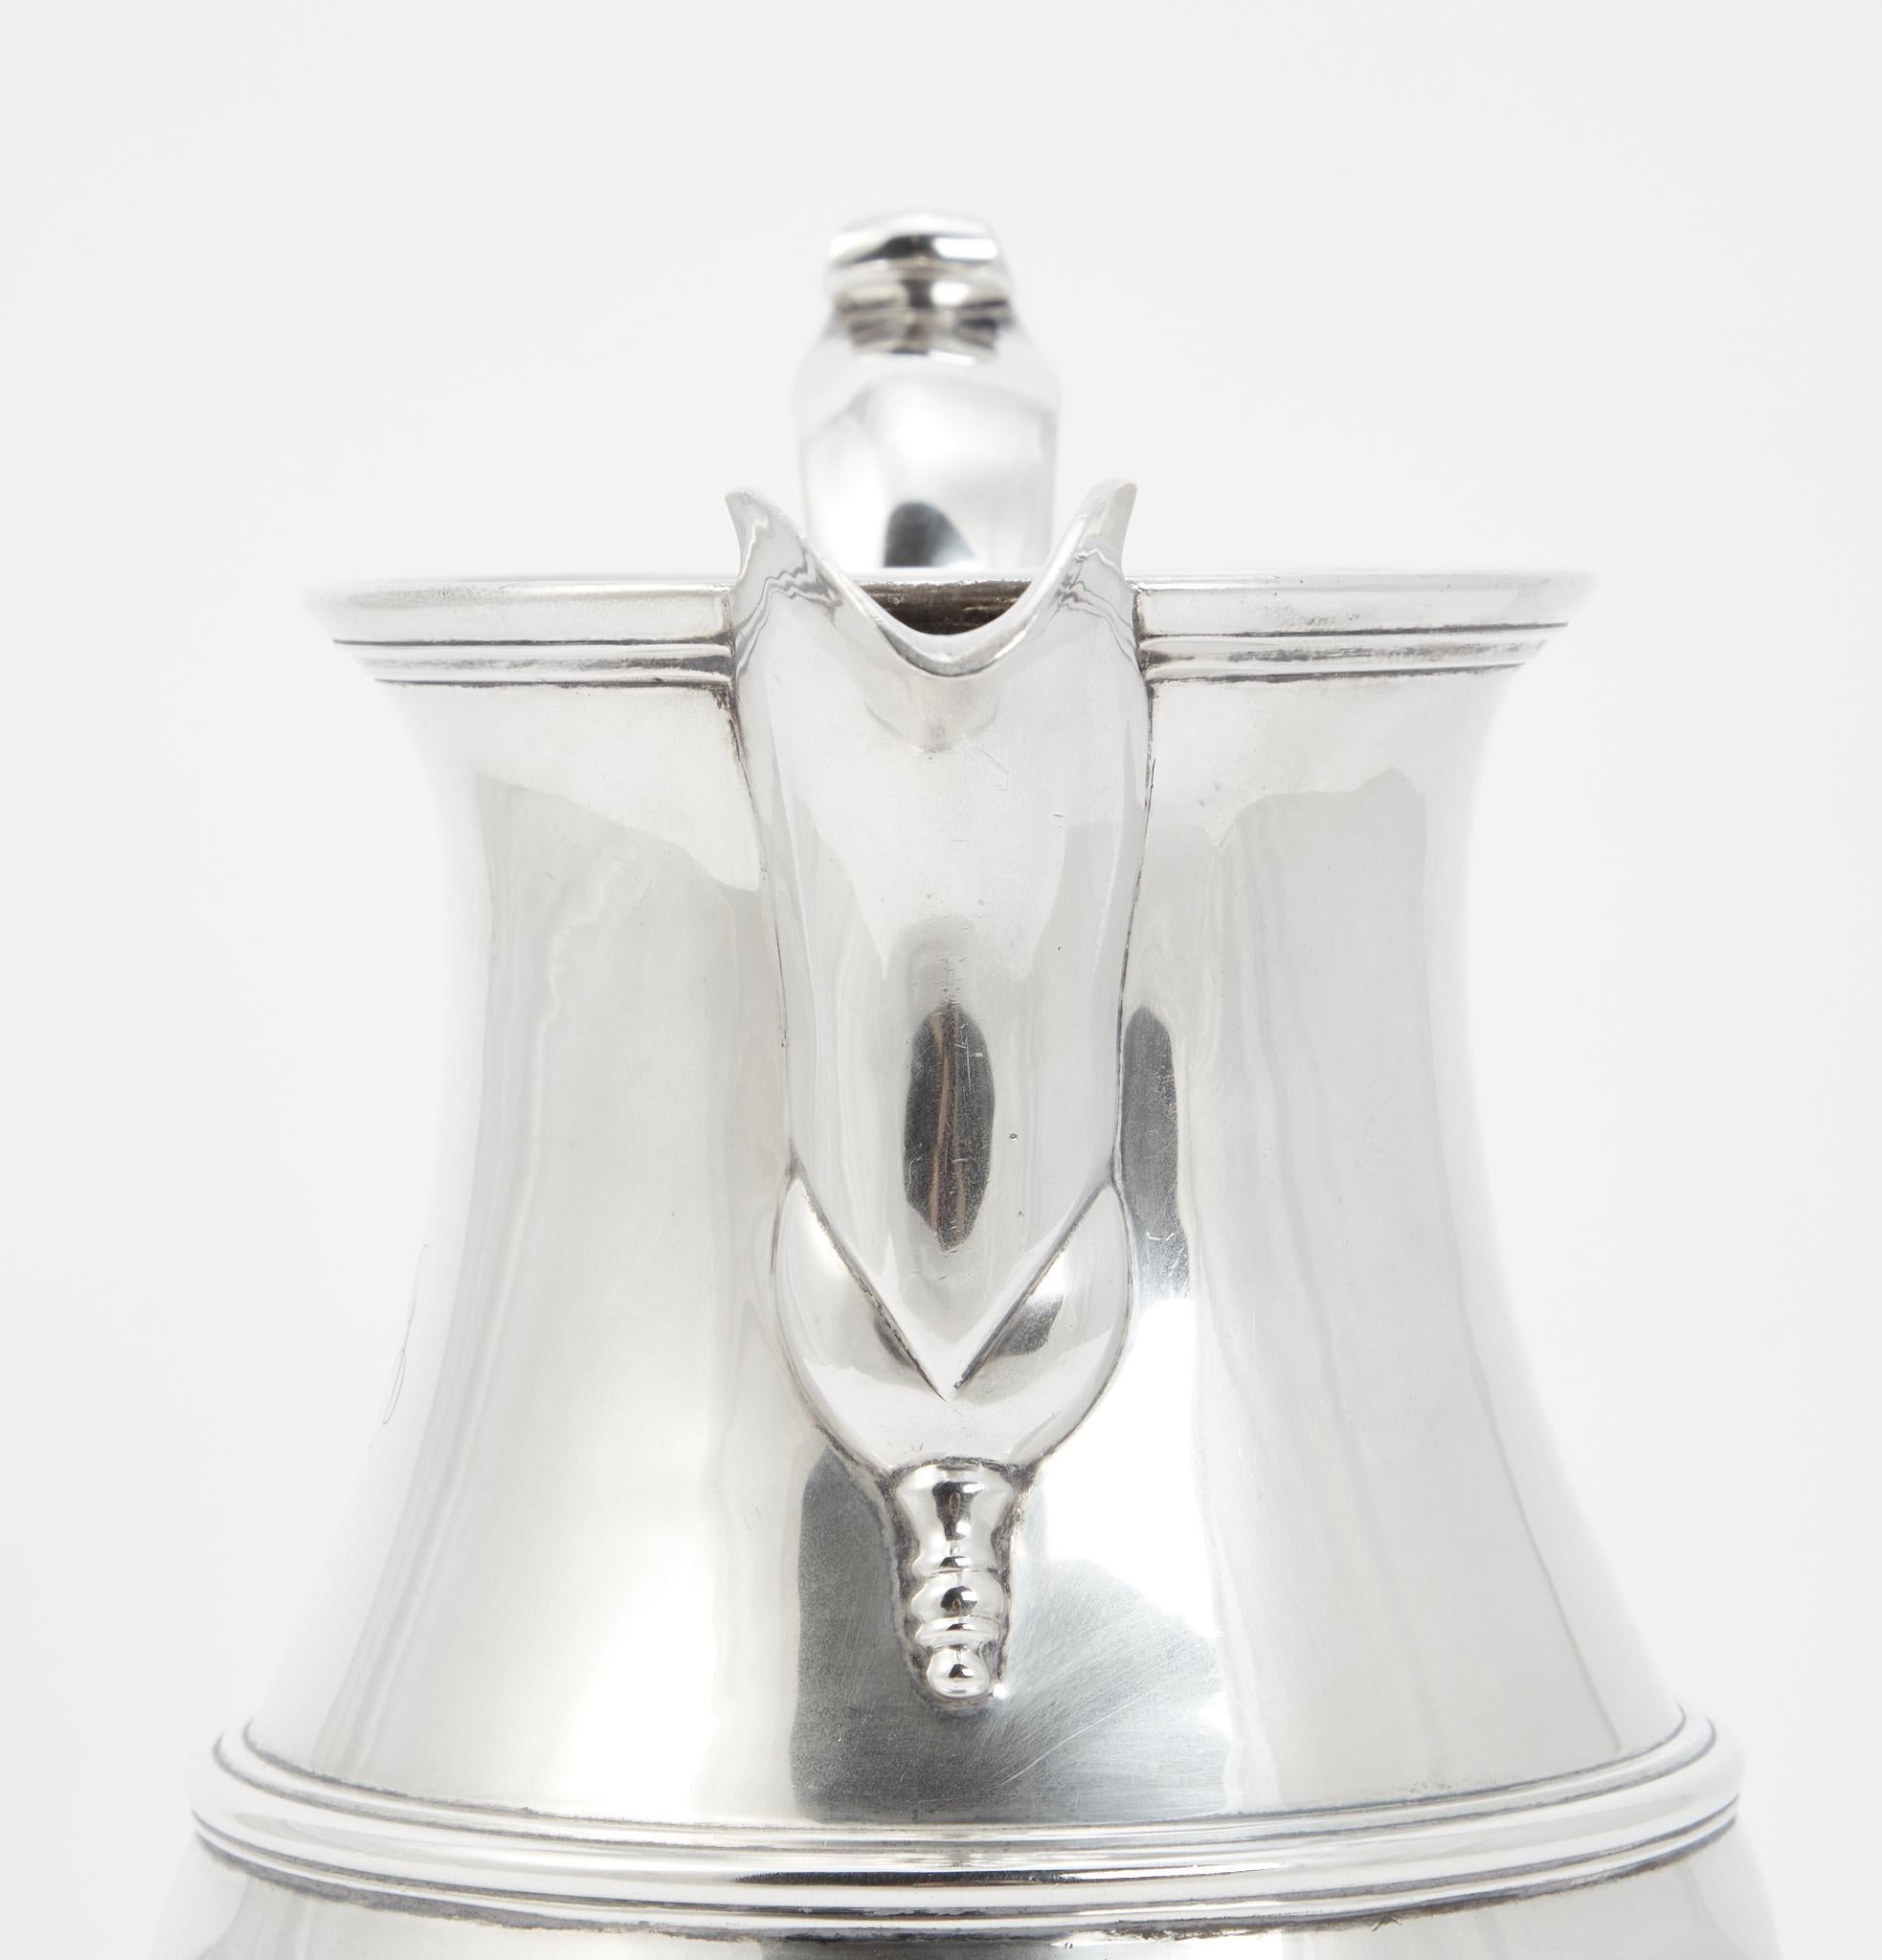 A George V Sterling Silver Pitcher, Circa 1928 
By William Comyns & Sons
Monogrammed and fitted with sterling silver hallmark
Sourced from London, England by Martyn Lawrence Bullard